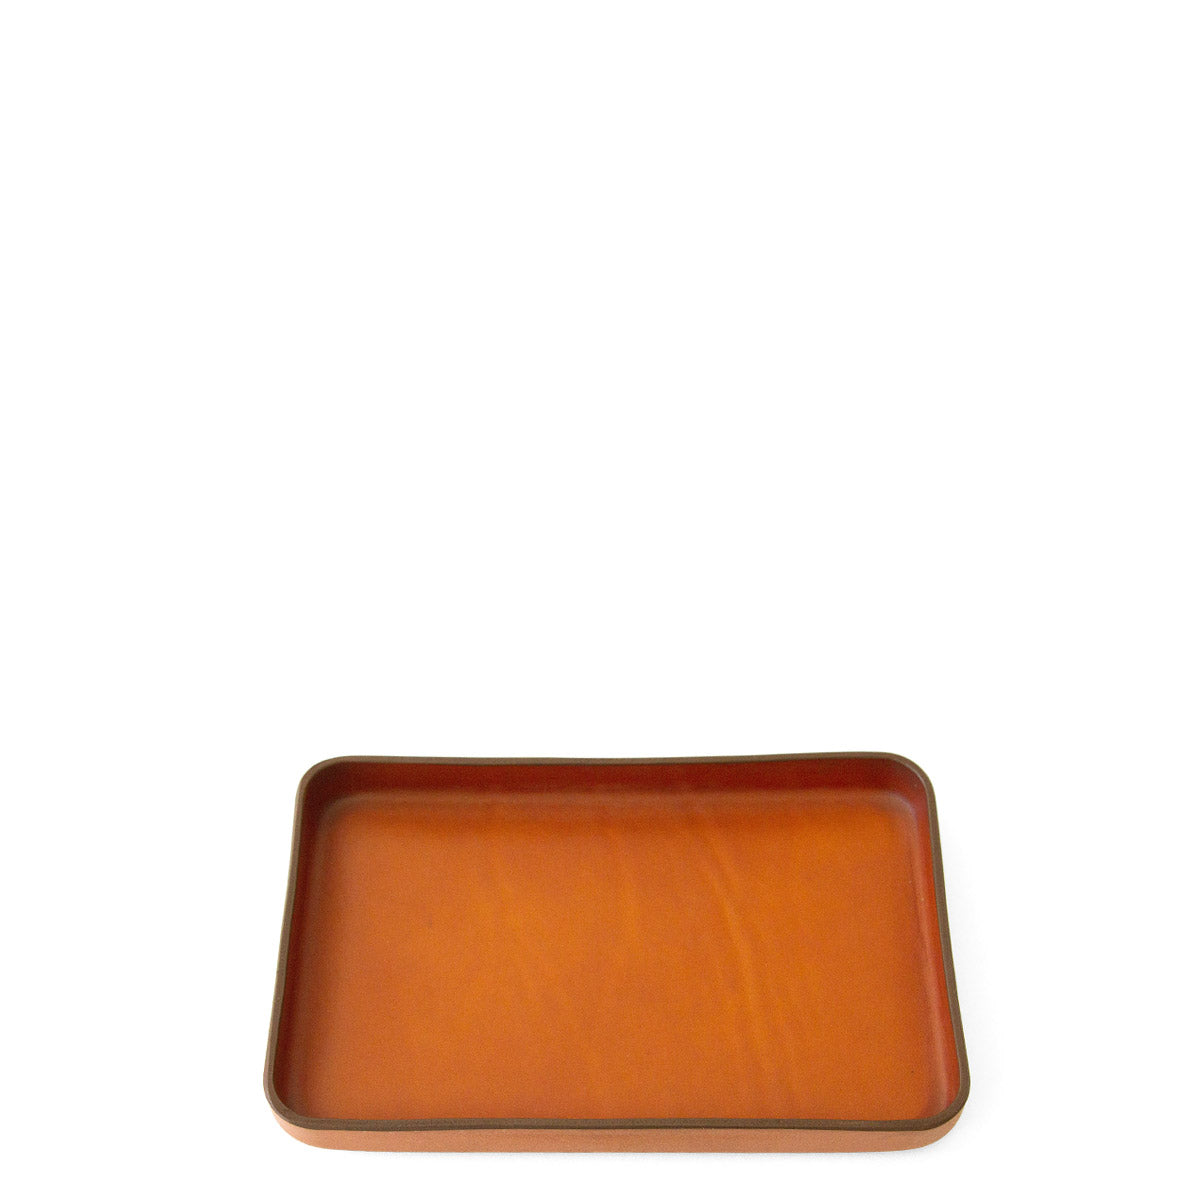 Swags Large Valet Tray - Tan